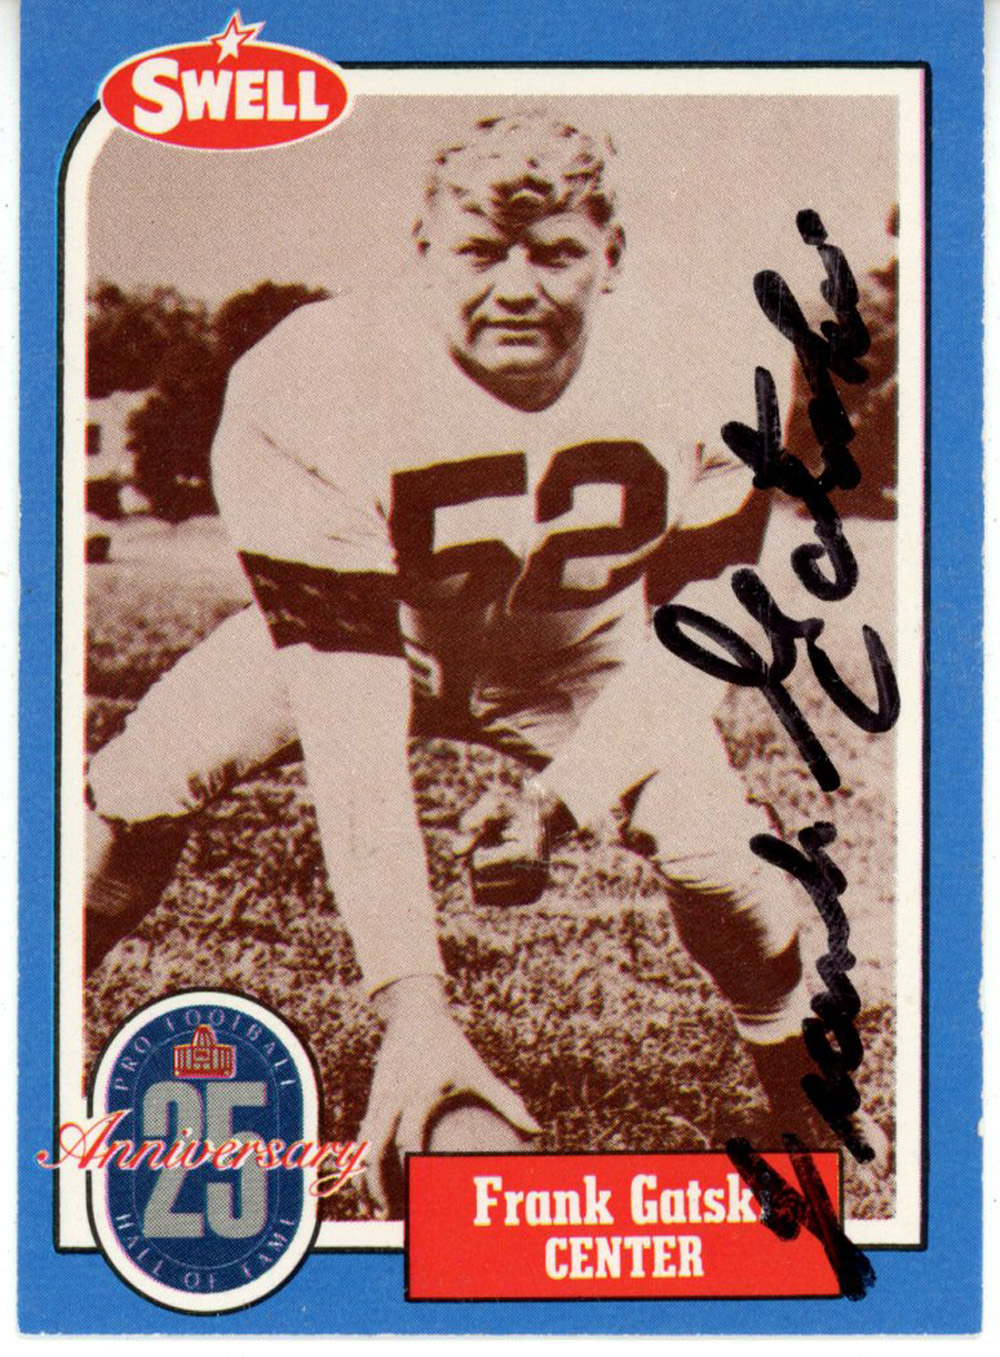 Frank Gatsik Autographed/Signed Cleveland Browns 1988 Swell HOF Card